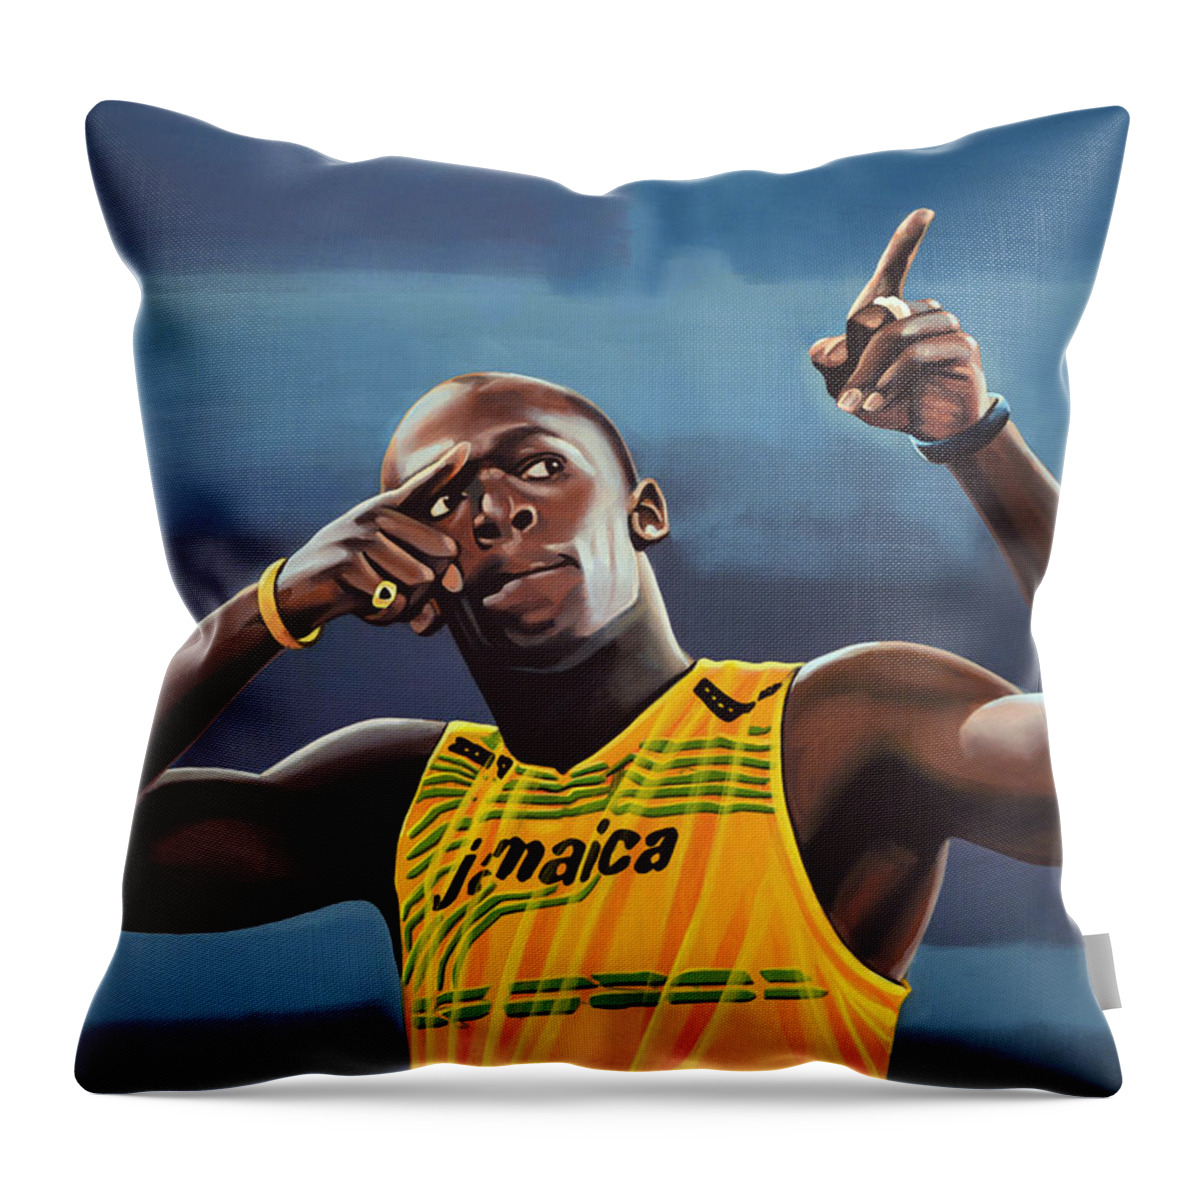 Usain Bolt Throw Pillow featuring the painting Usain Bolt Painting by Paul Meijering